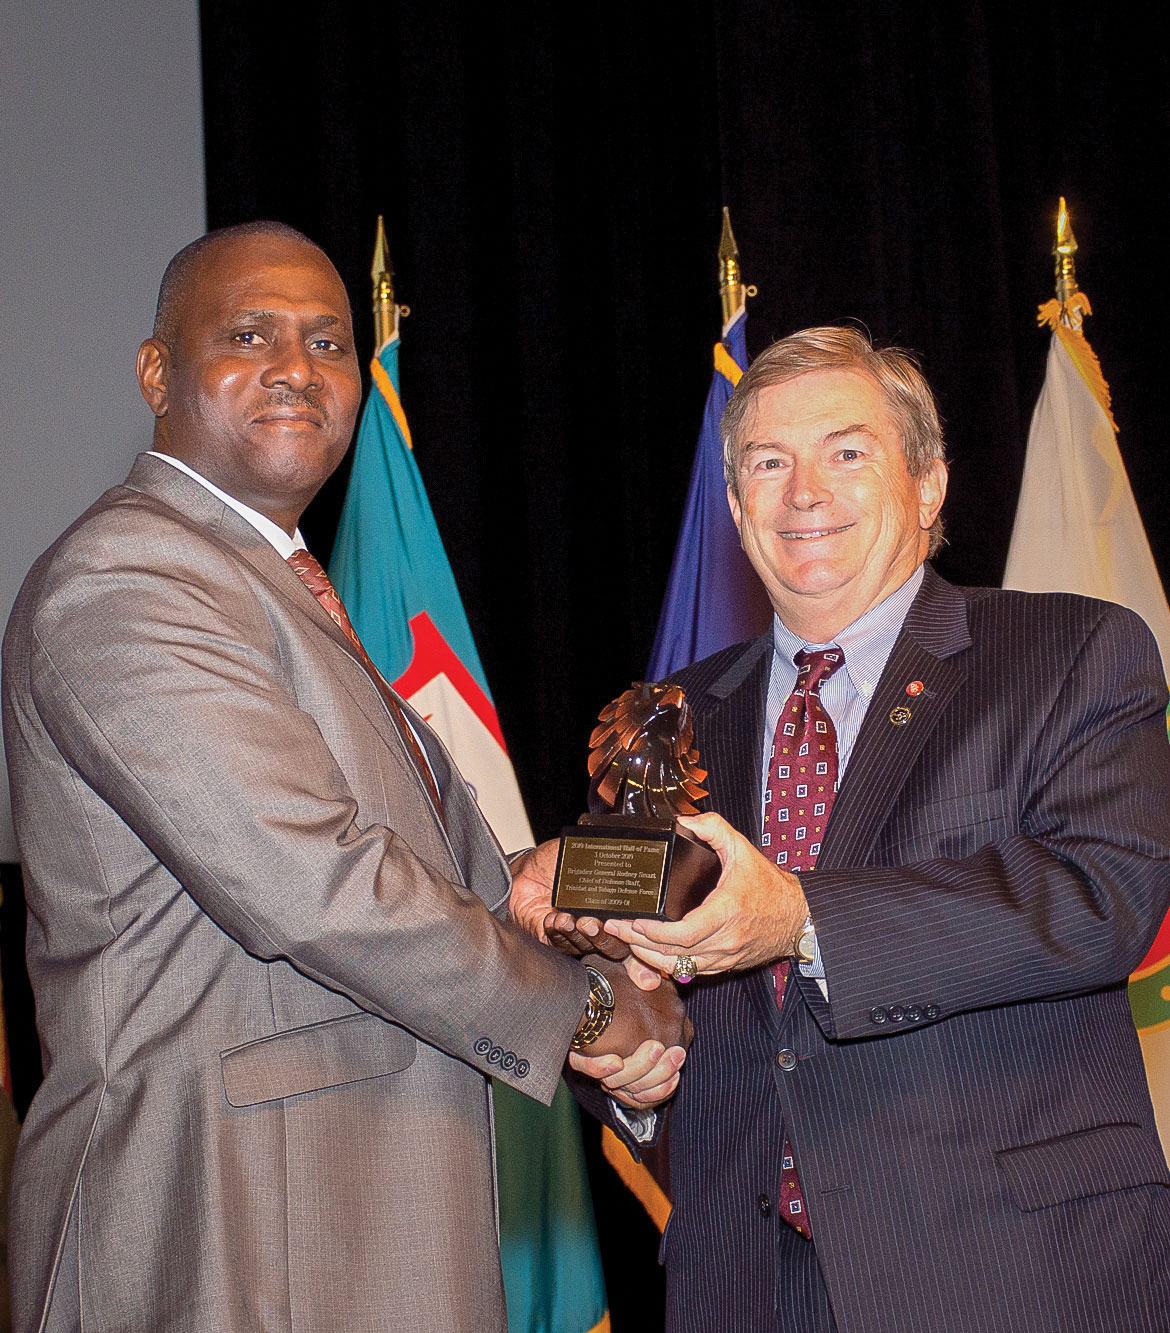 After unveiling his International Hall of Fame portrait, IHOF inductee retired Maj. Gen. Rodney Smart, former chief of Defence Staff of the Trinidad and Tobago Defence Force, receives an eagle statuette gift from Michael Hockley, chairman of the board of the Command and General Staff College Foundation, during his IHOF induction ceremony Oct. 3, 2019, at the Lewis and Clark Center.